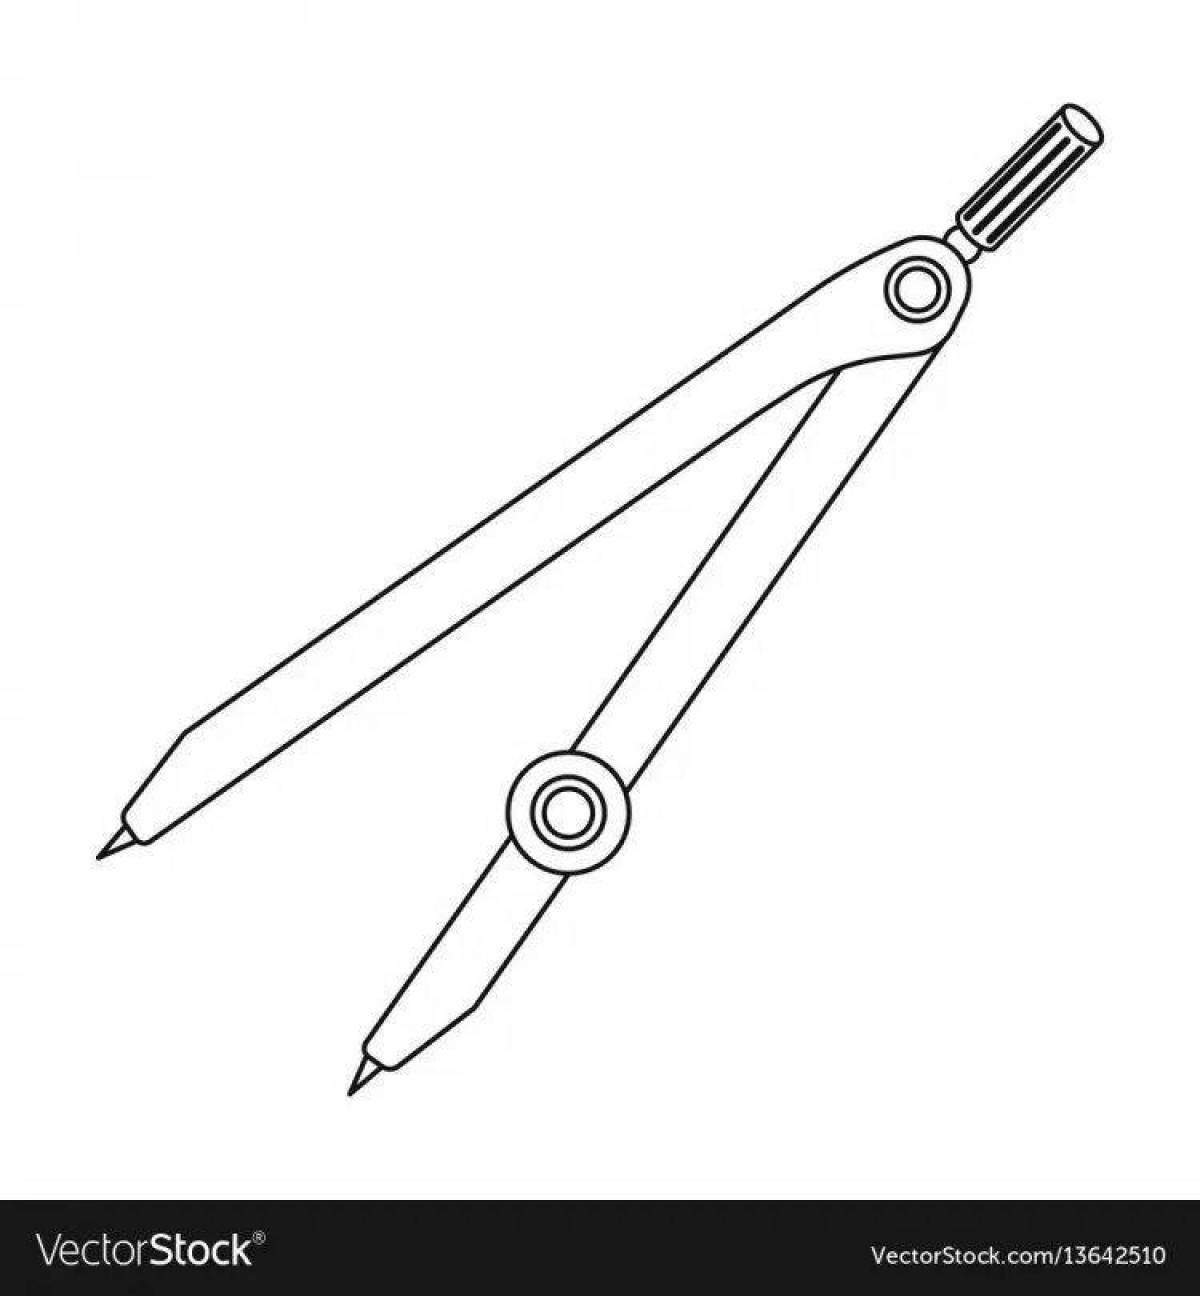 Exciting compass coloring page